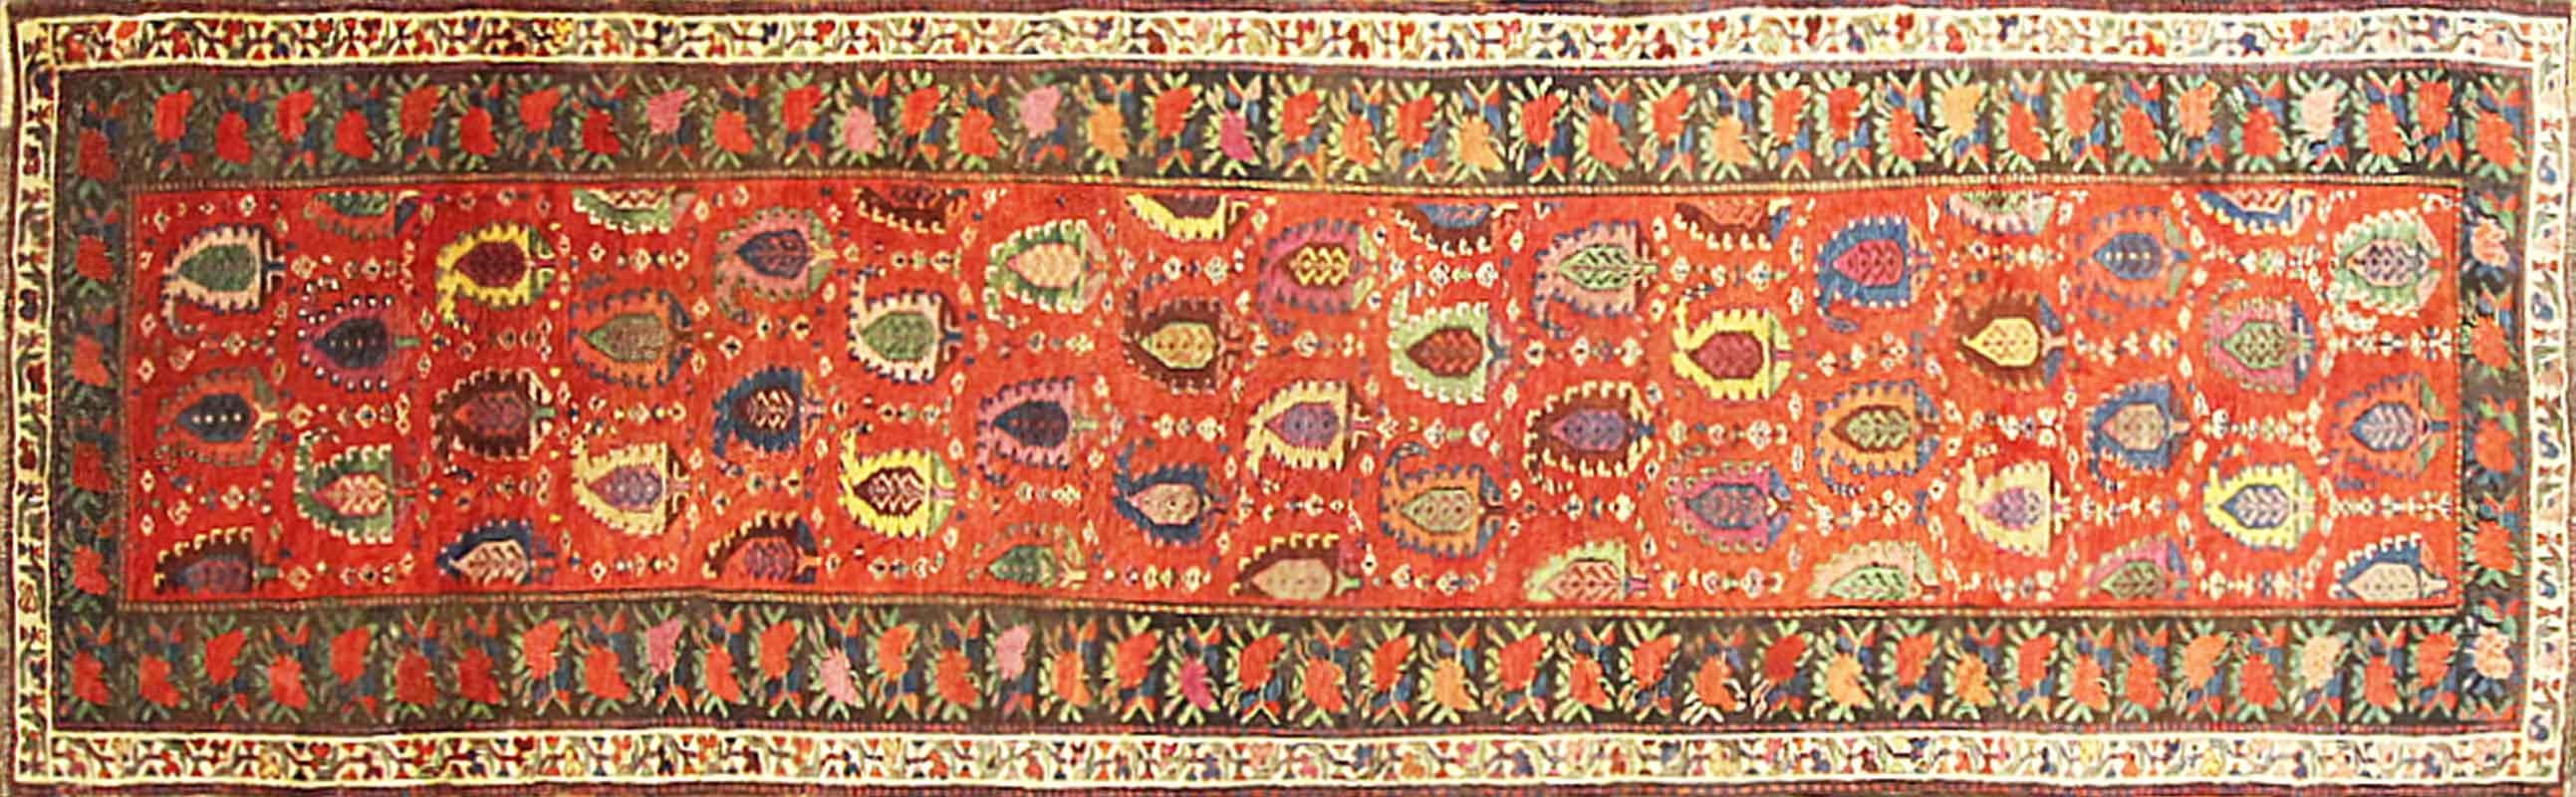 Antique handmade tribal Caucasian Karabagh Runner, Circa Date: 1890, The first things that draw your eye to this carpet are the brilliant colors and Oriental-style design. Karabagh is a region in the southern Caucasus mountains in a region that is